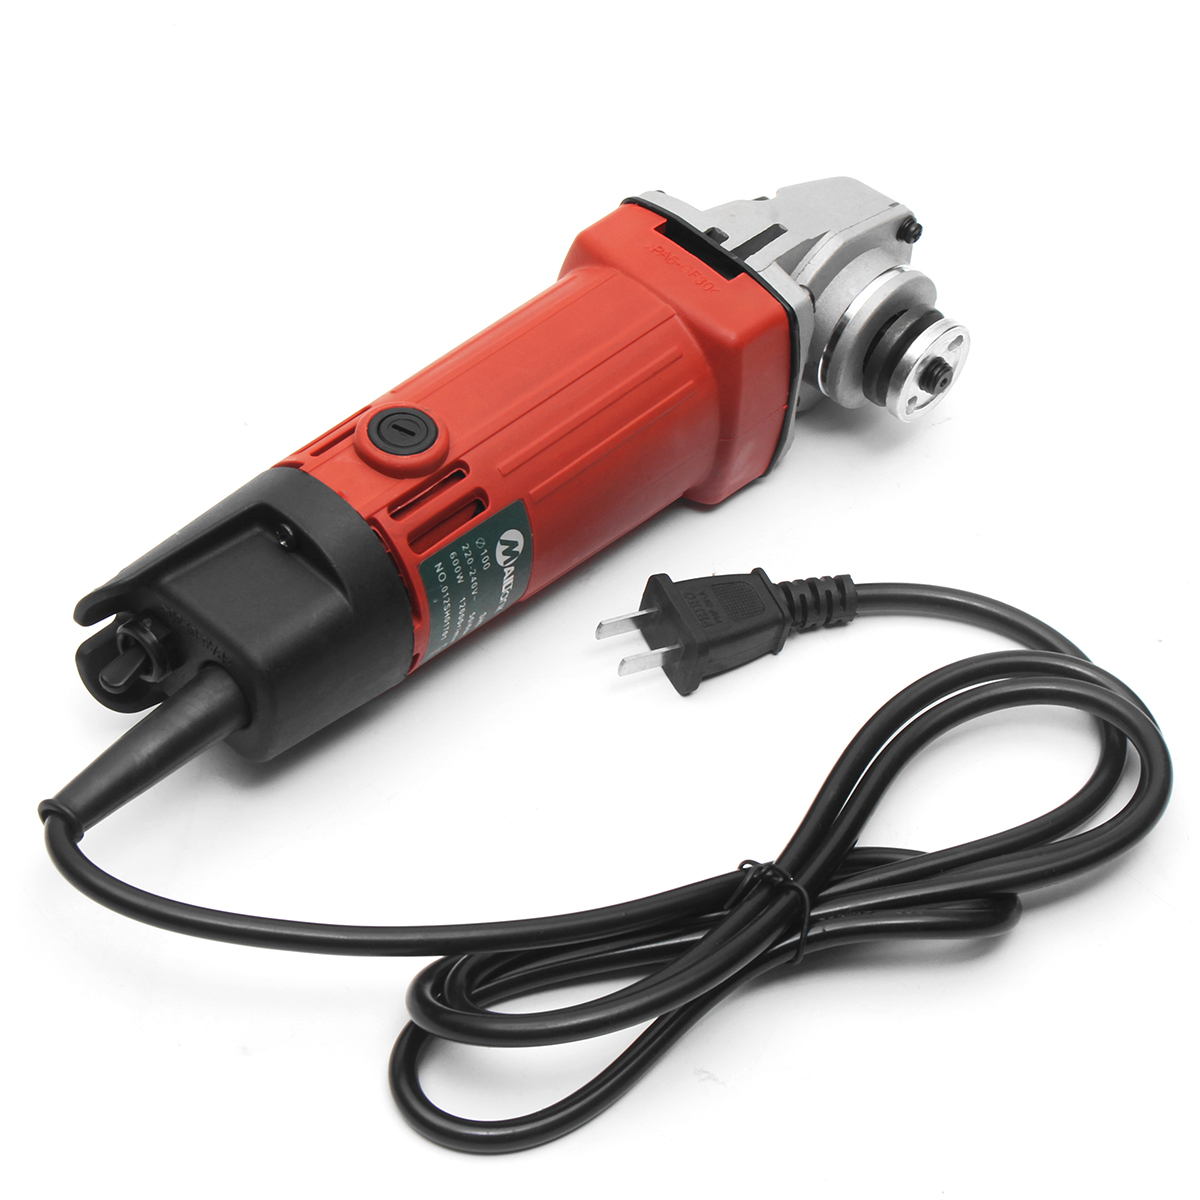 220V-600W-Multifunctional-Electric-Angle-Grinder-Polishing-Machine-Metal-Grinding-Cutter-Tool-1292095-2